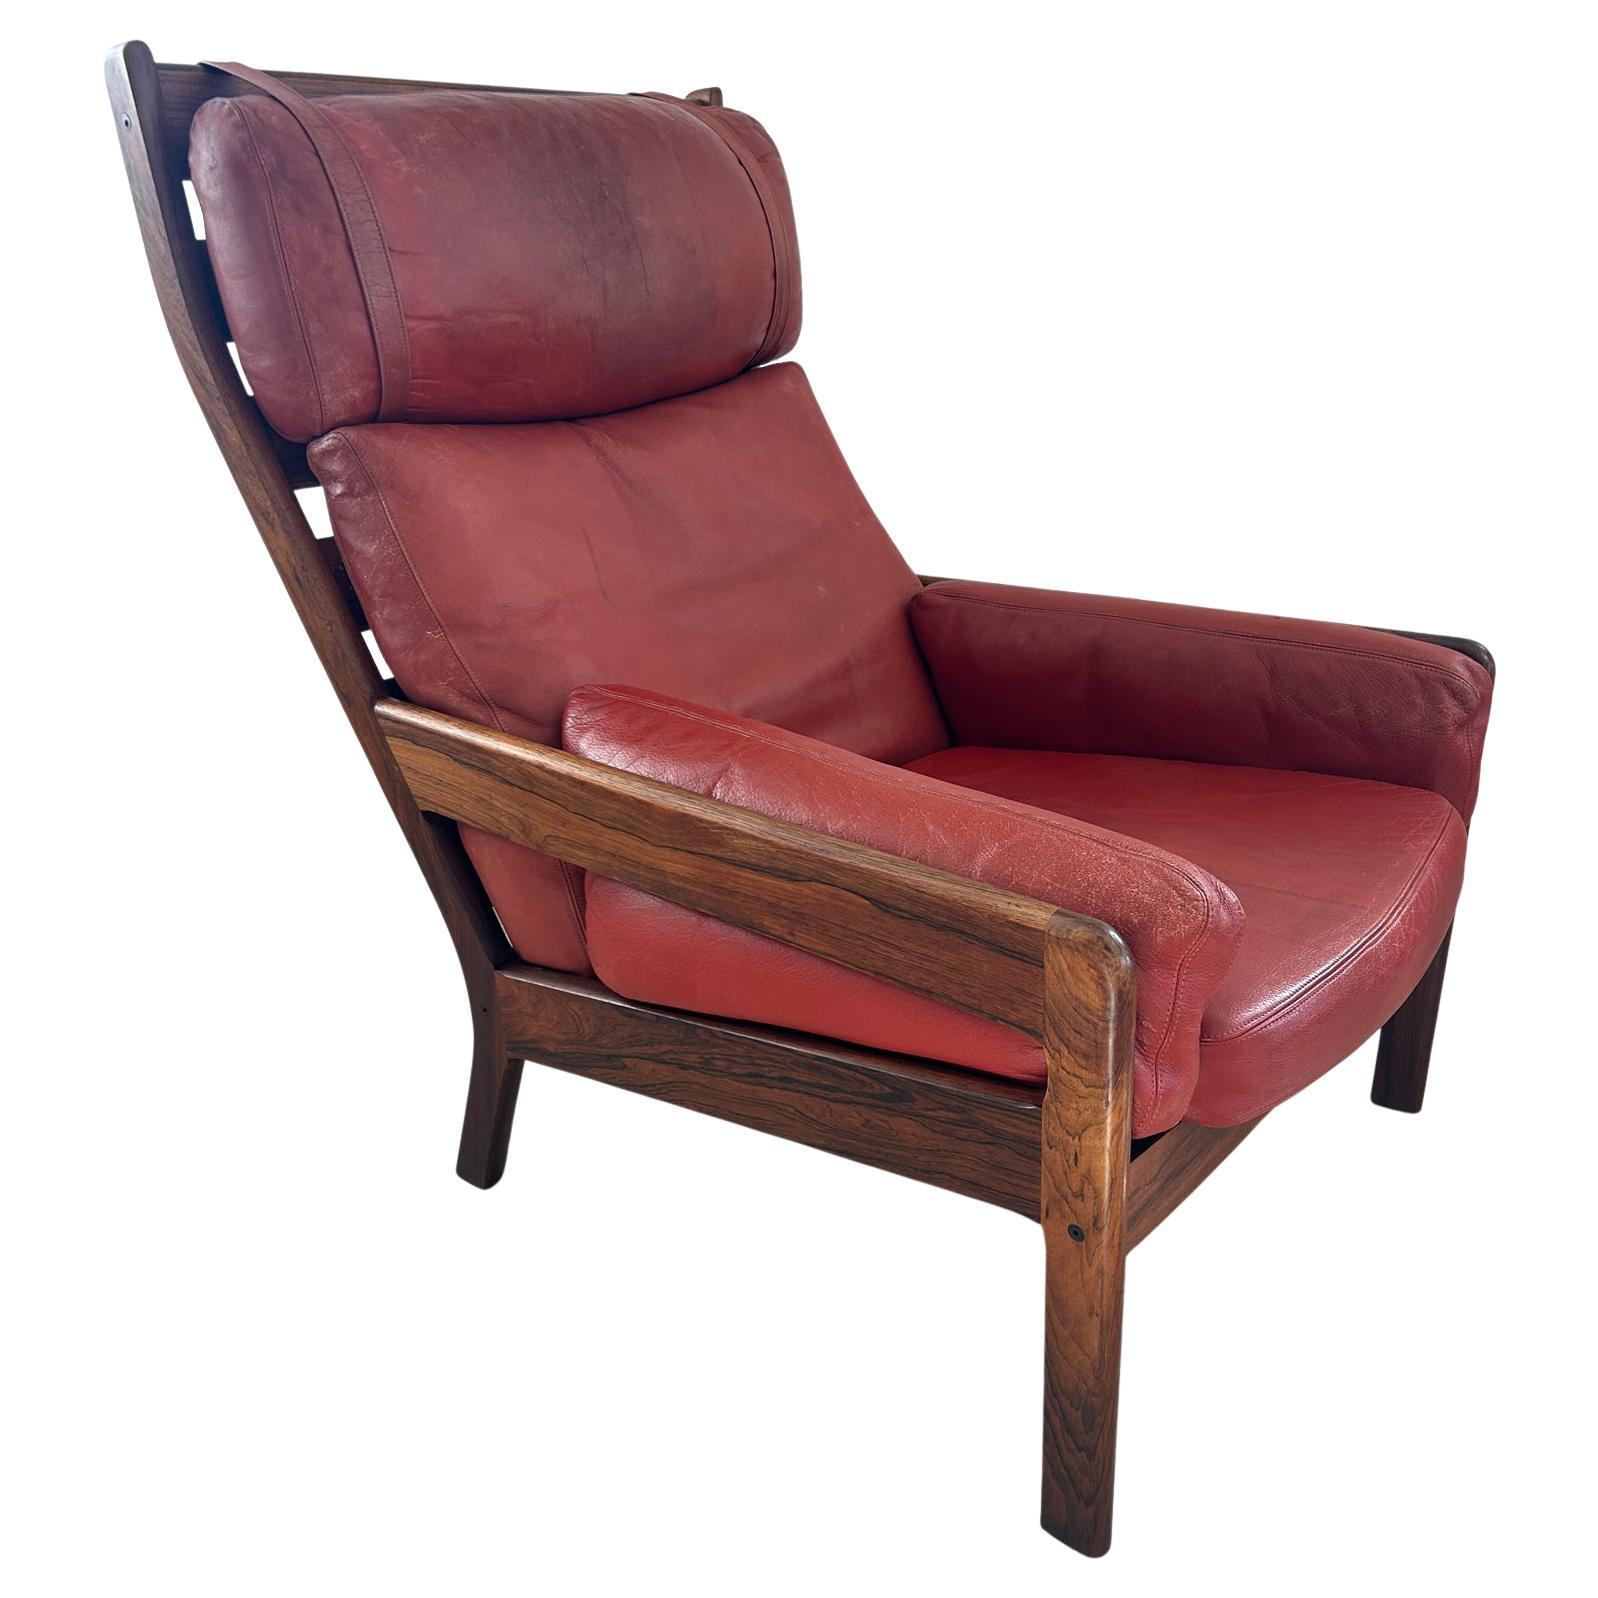 Danish Midcentury Scandinavian Modern Solid Rosewood Red Leather Lounge Chair For Sale